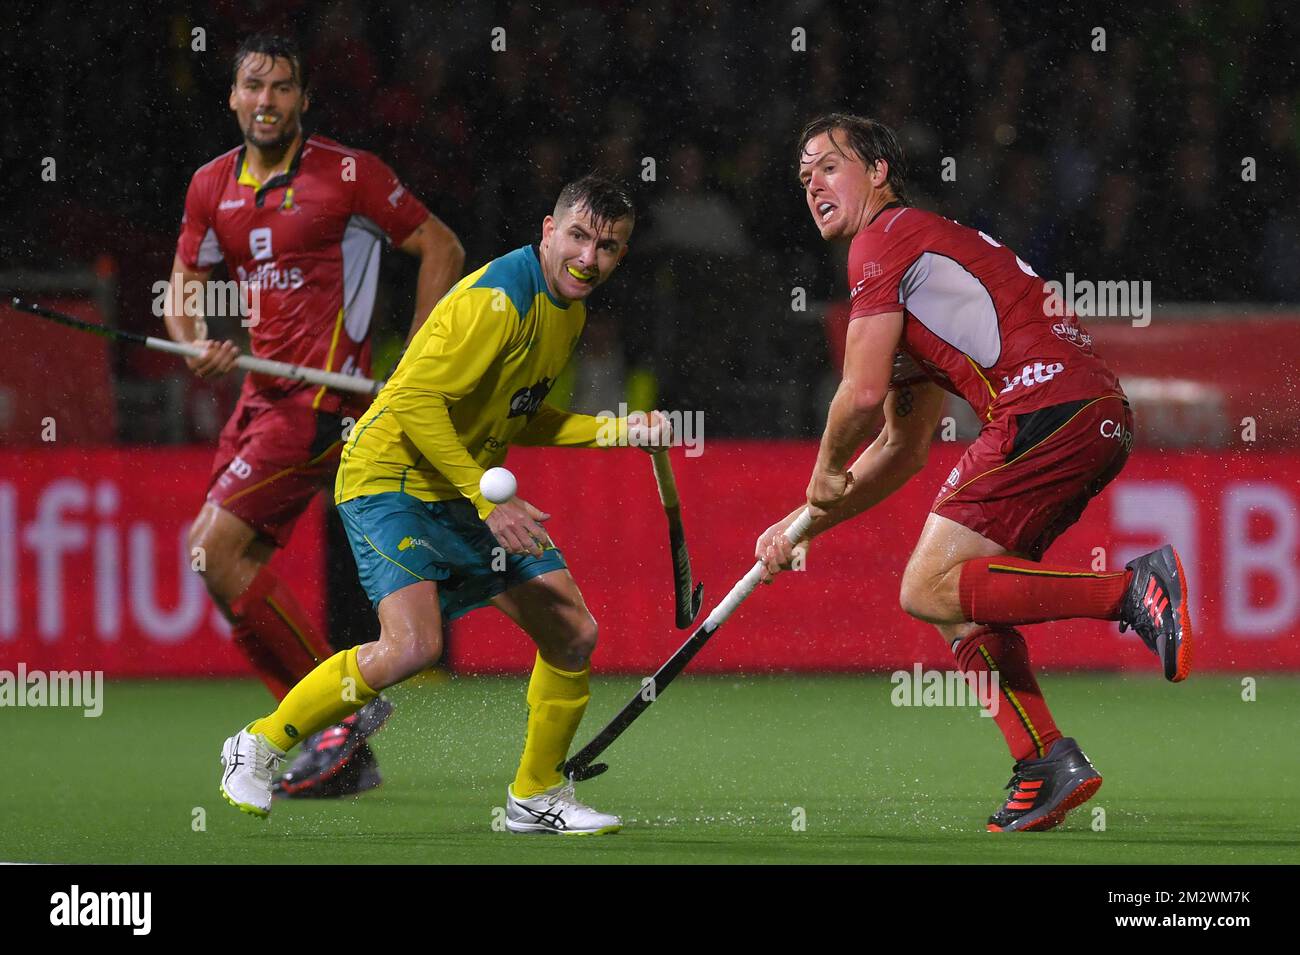 Belgium's Tom Boon fight for the ball during a field hockey game between Belgium's national team Red Lions and Australia, Wednesday 19 June 2019 in Wilrijk, Antwerp, game 13/14 of the men's FIH Pro League competition. BELGA PHOTO LUC CLAESSEN Stock Photo